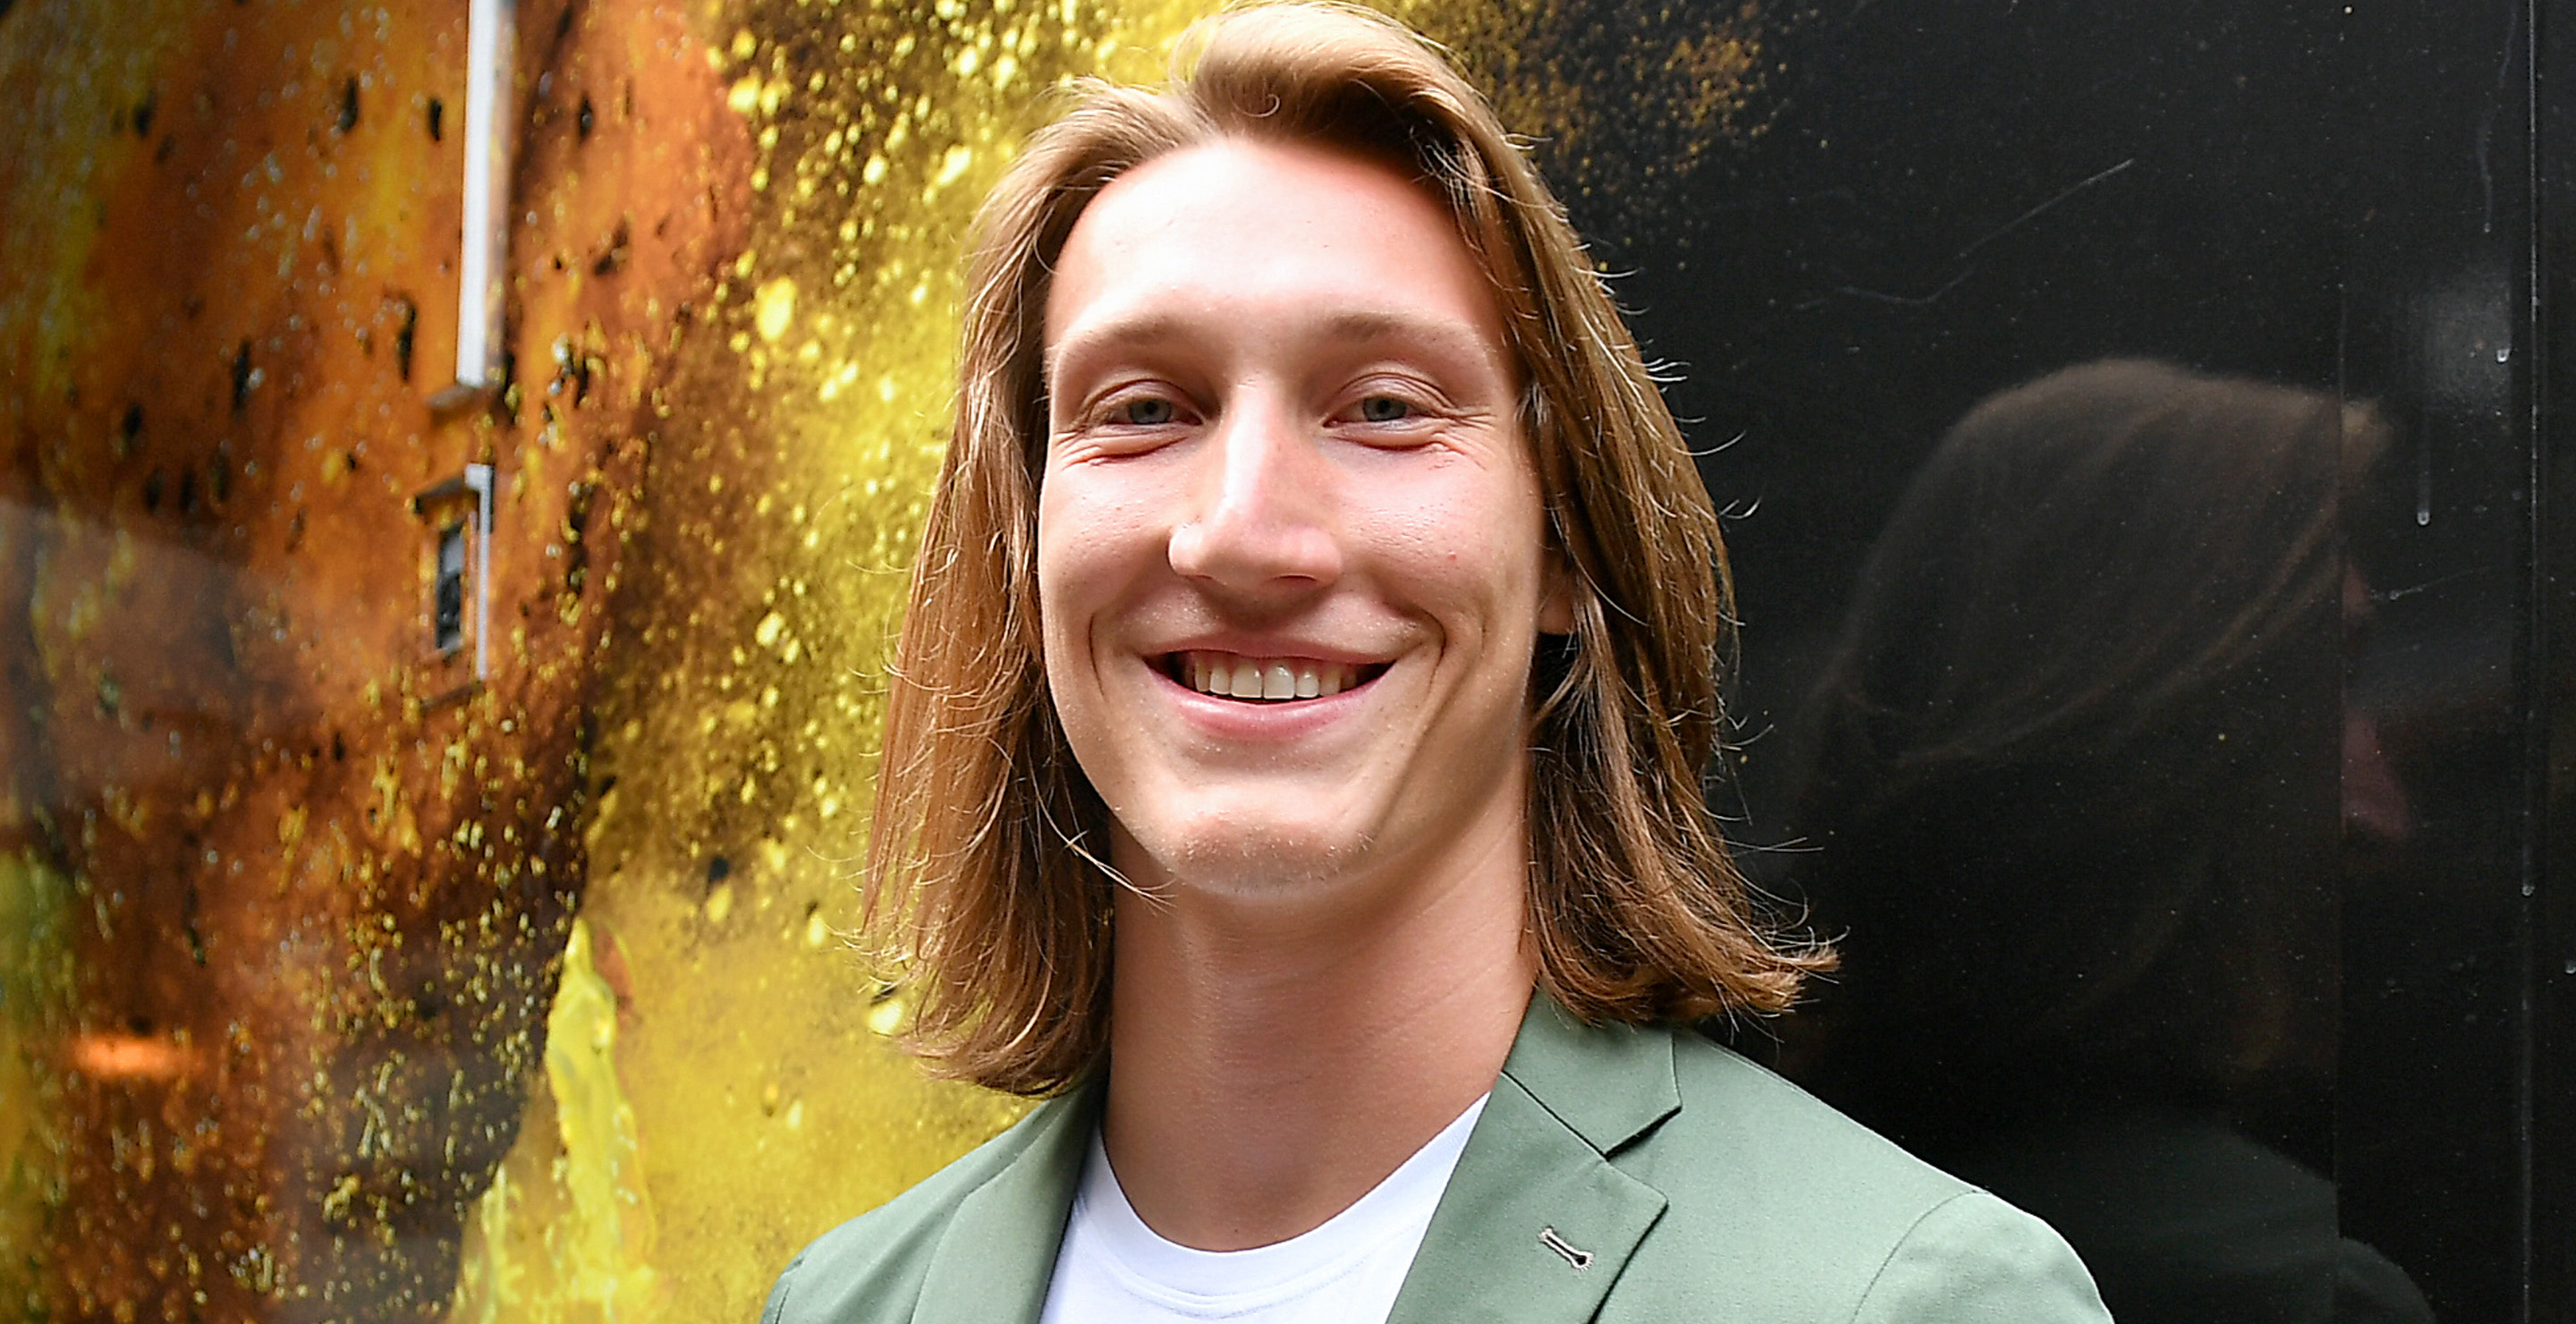 Trevor Lawrence loves country and mentions George Strait and Chris Stapleton